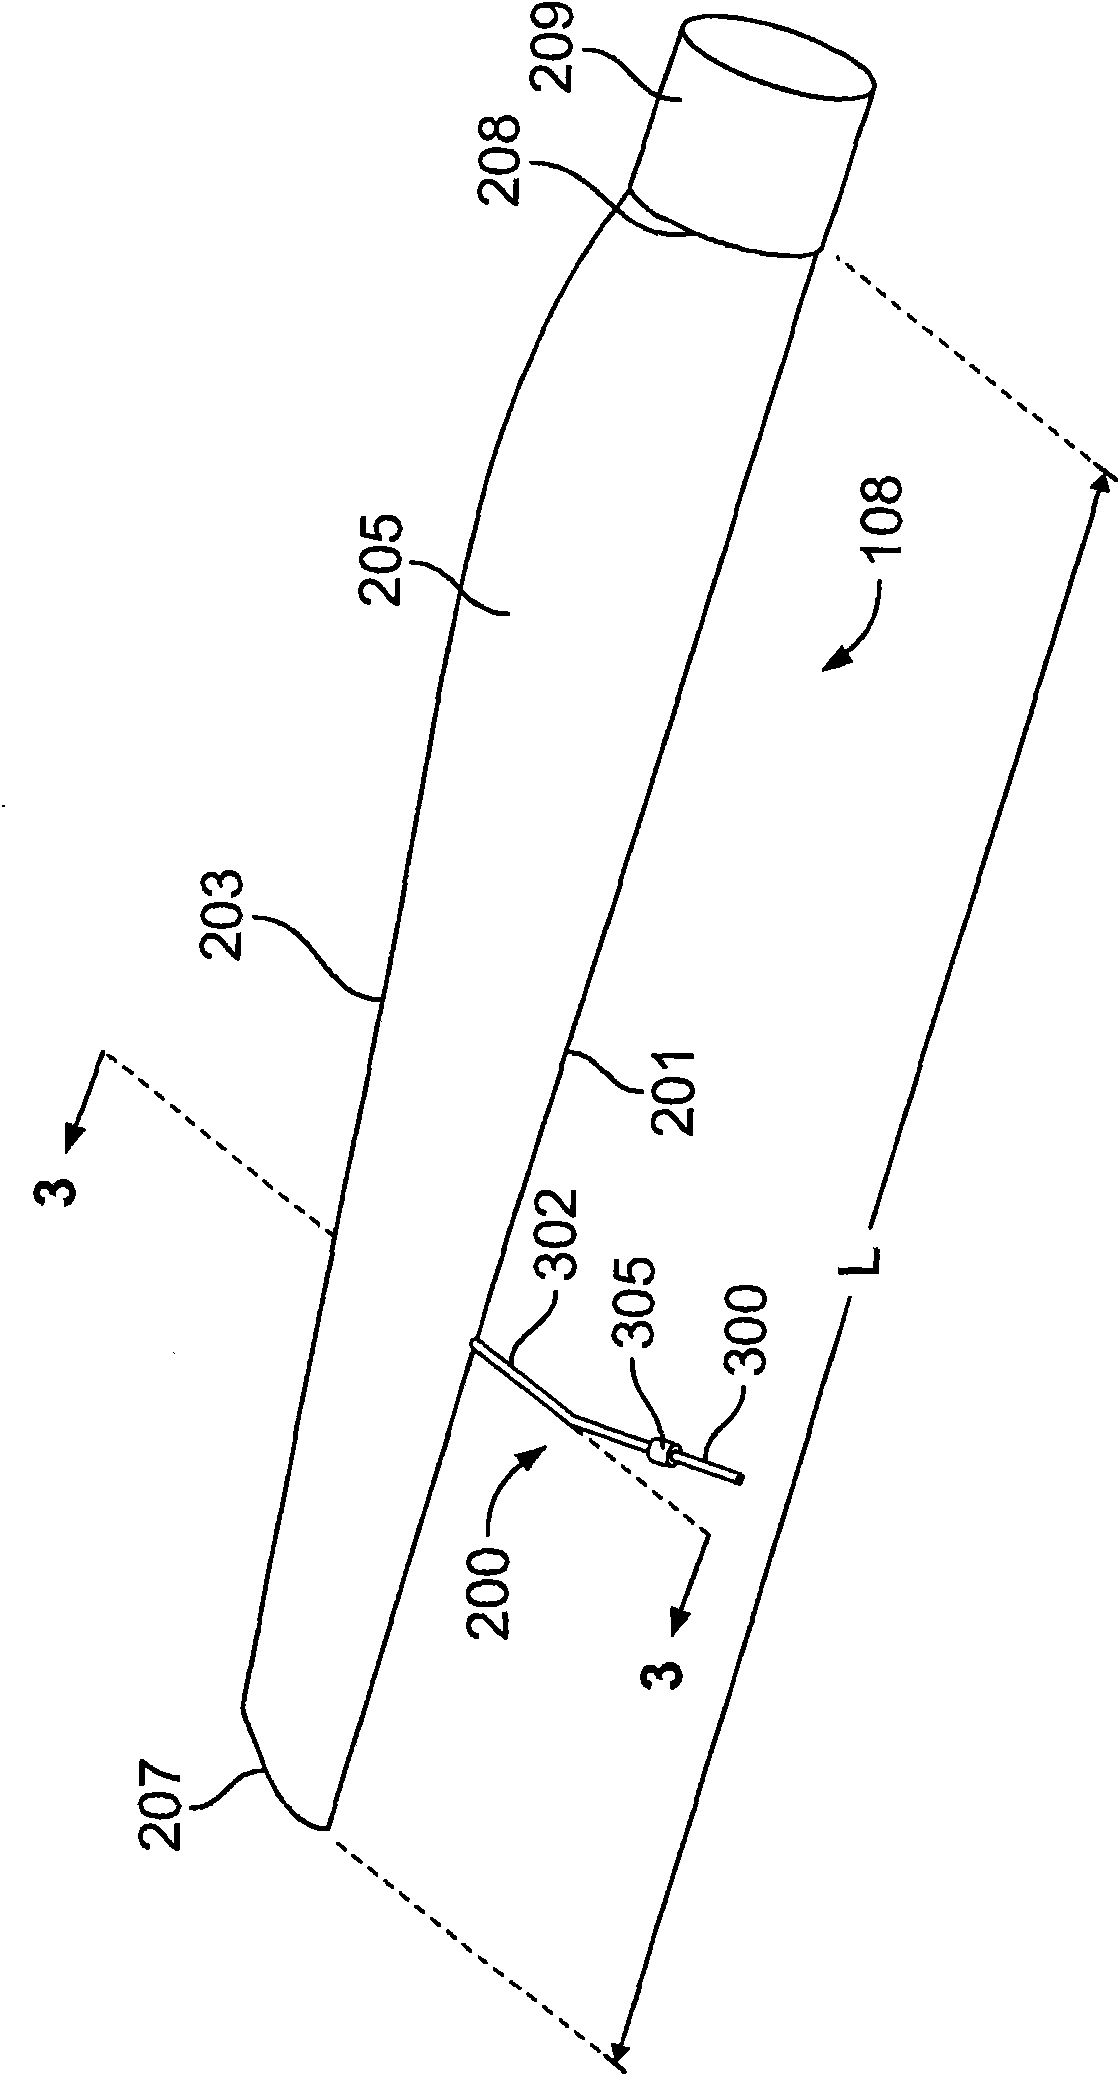 System for the monitoring of the wind incidence angle and the control of the wind turbine